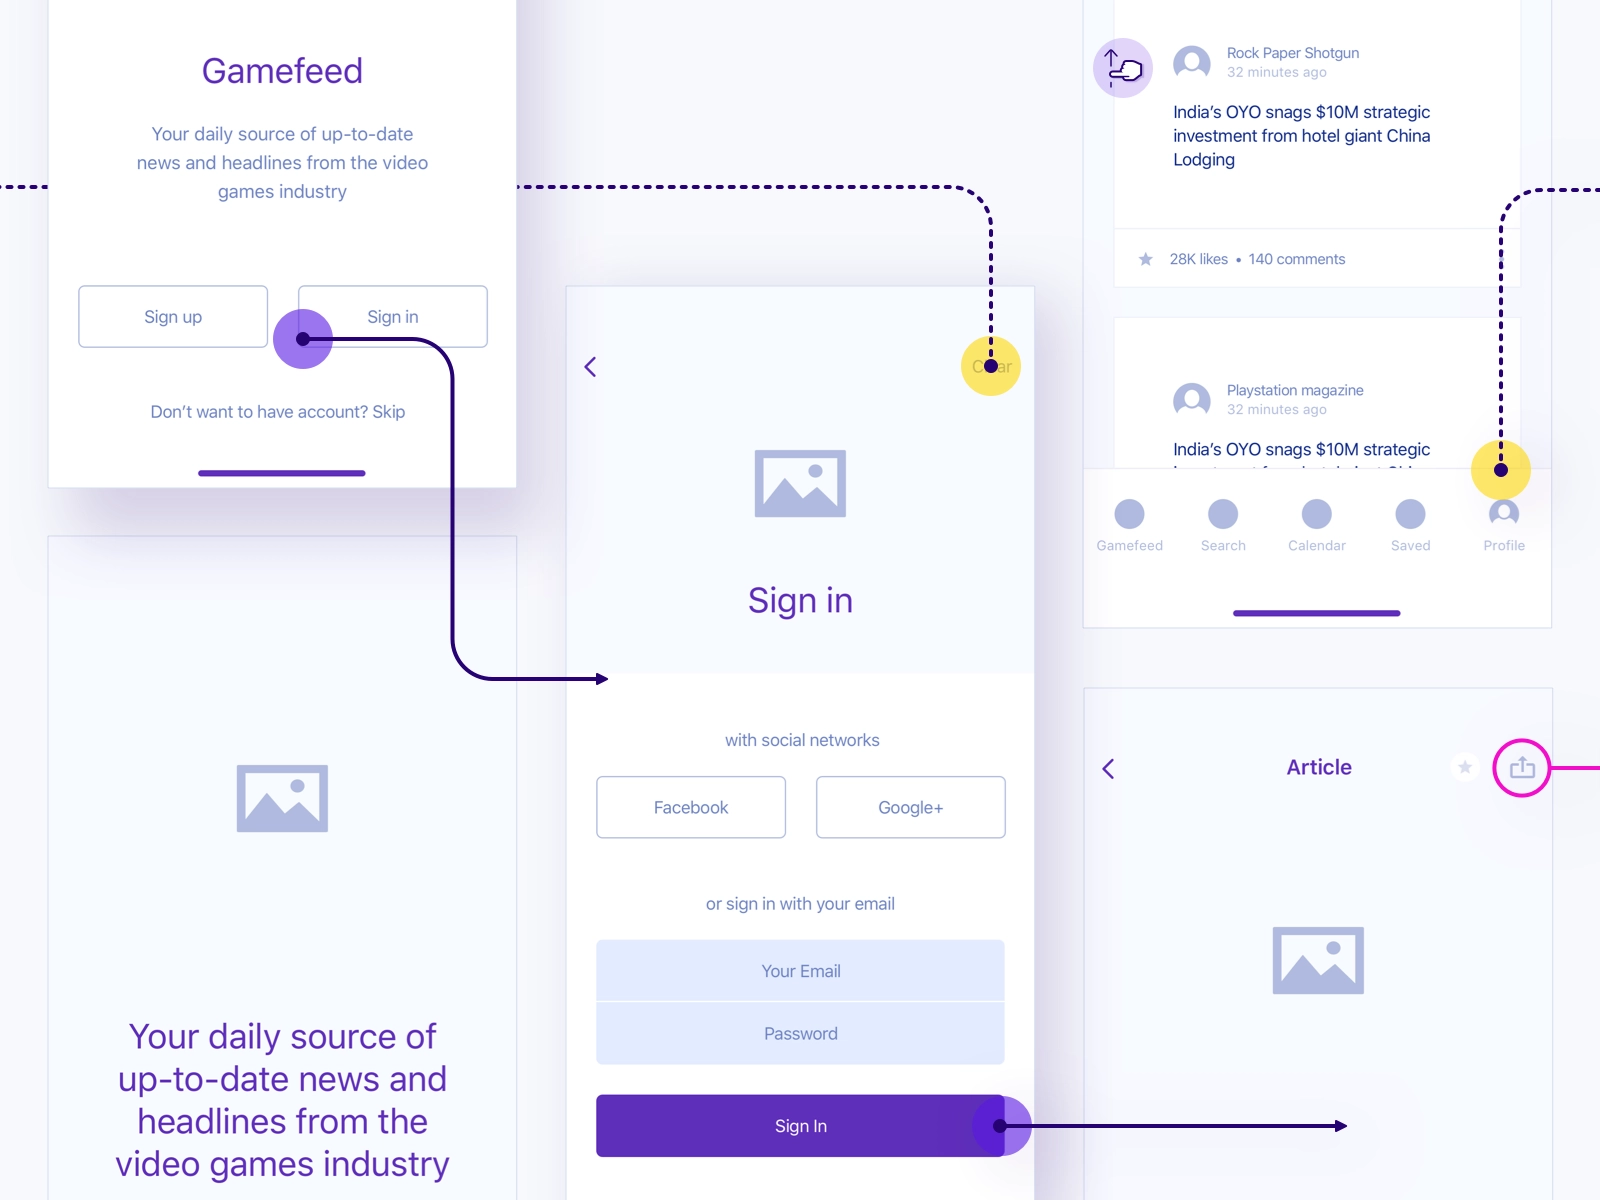 Piotr Kaźmierczak uses color in his wireframes to highlight call-to-action buttons.